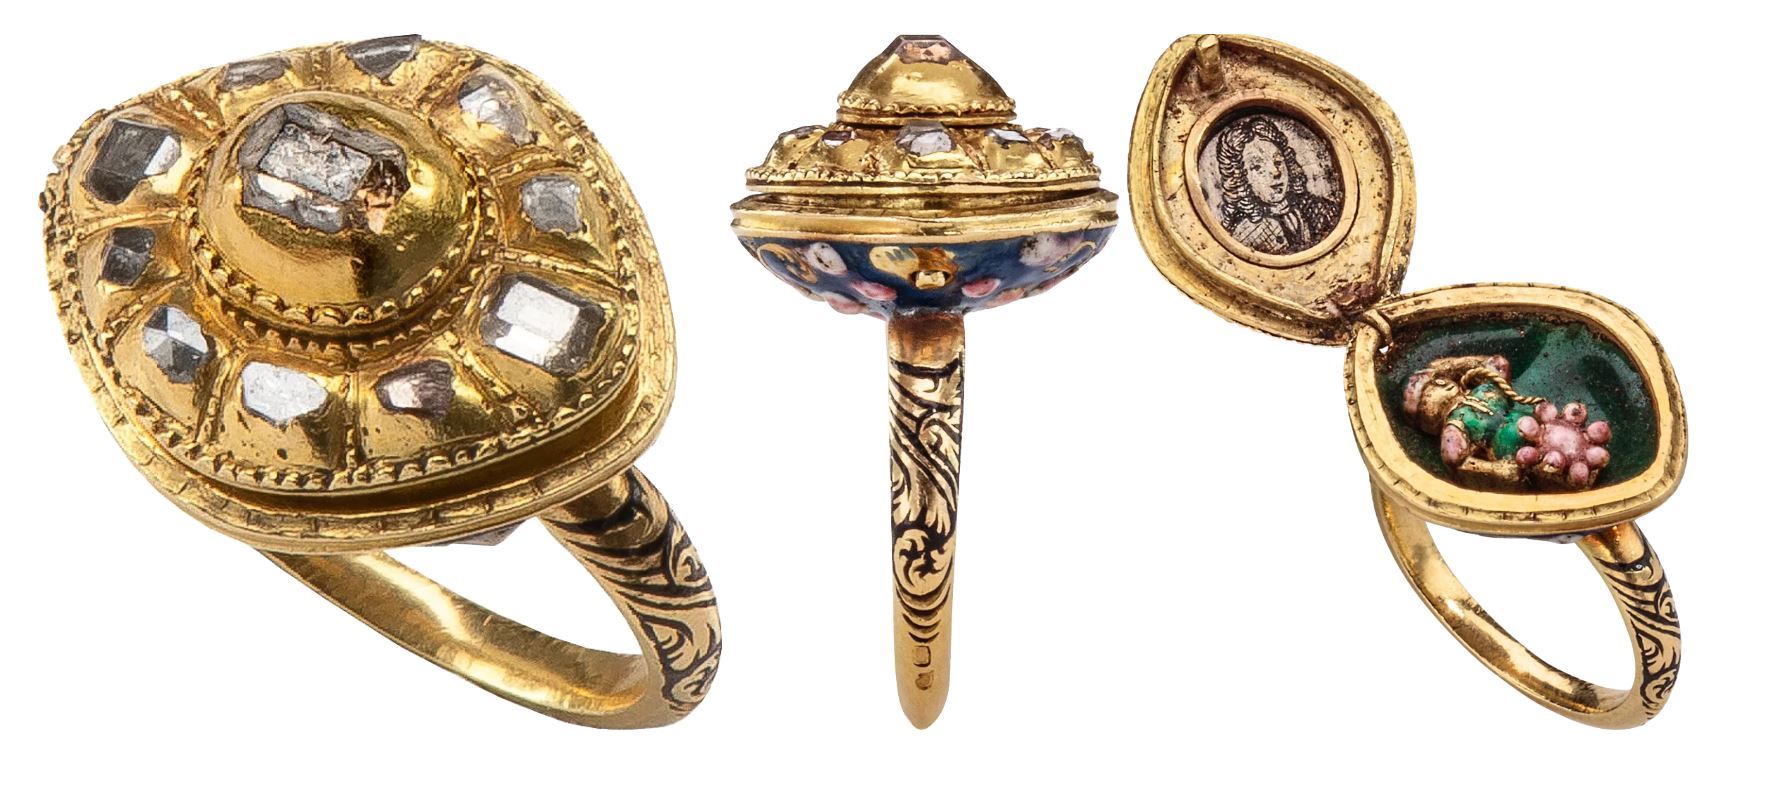 2020 04 09 11 26 38 King Baudouin Foundation purchases rare 17th century ring at The European Fine A